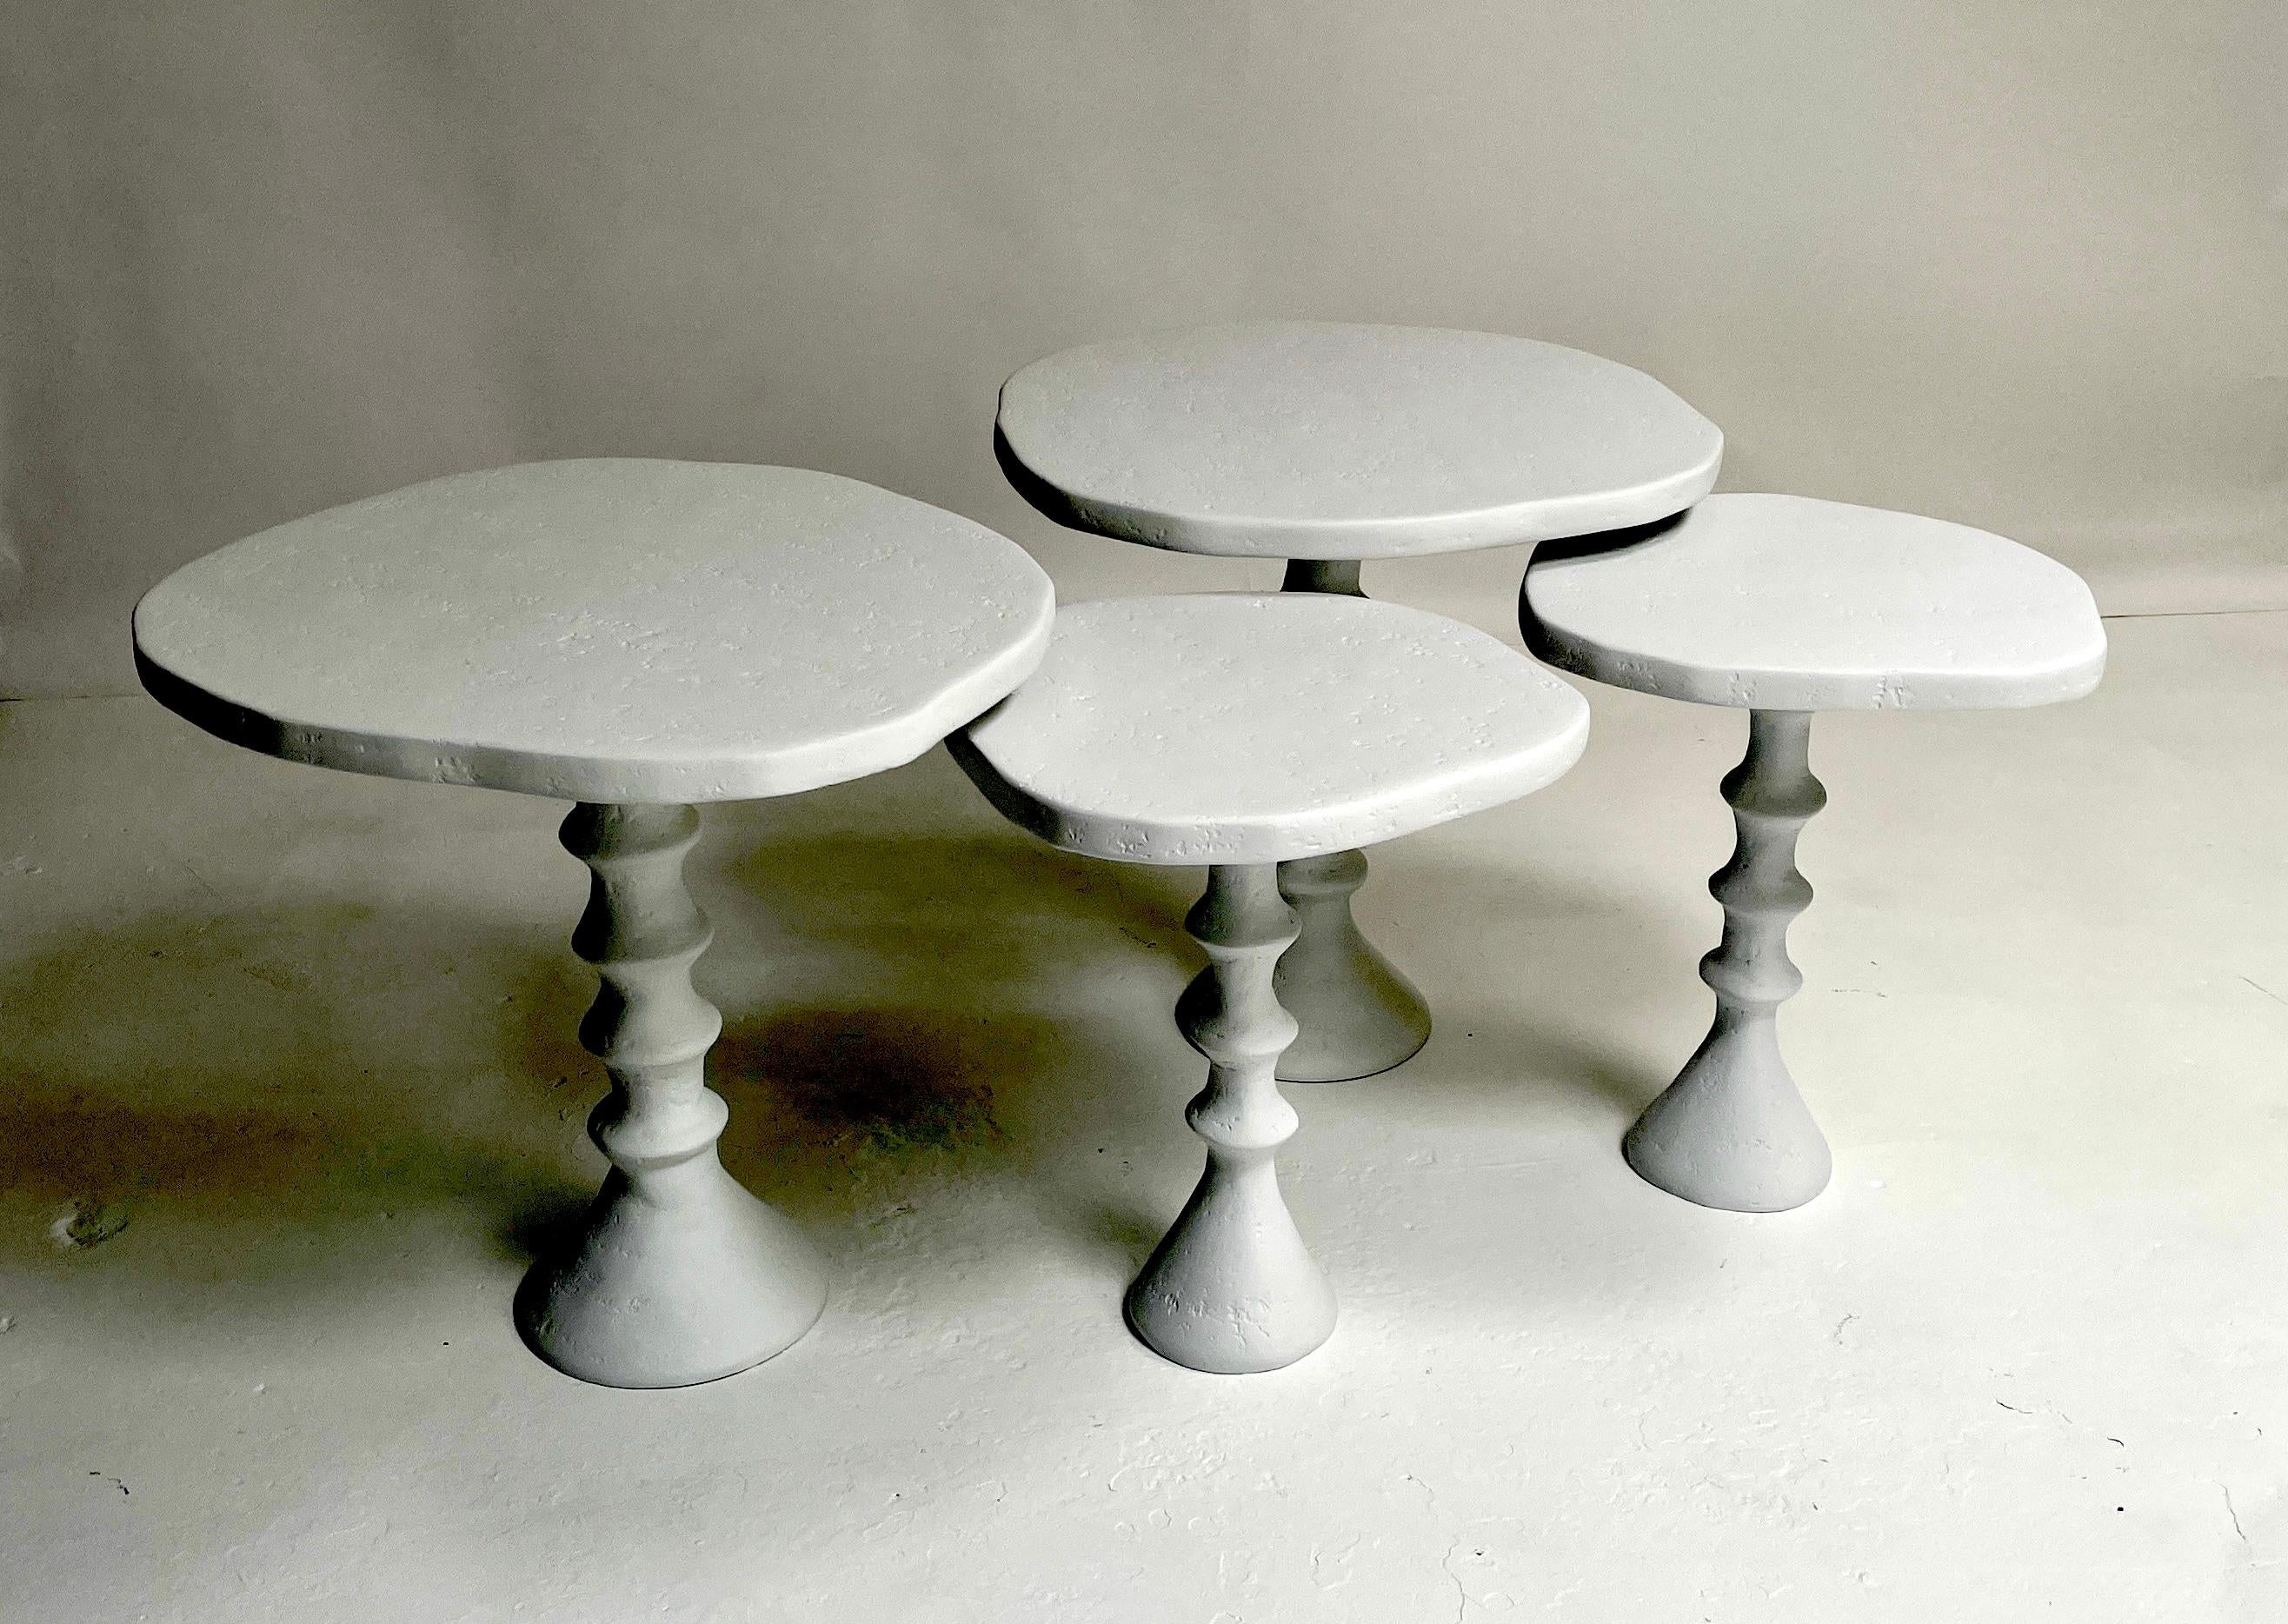 This grouping of four of our St Paul Plaster tables create a versatile table option. The four tables can be arranged to work as a coffee table, or side tables. They nest together or stand alone. The set is made up of two Moyen Modèle tables. 
(